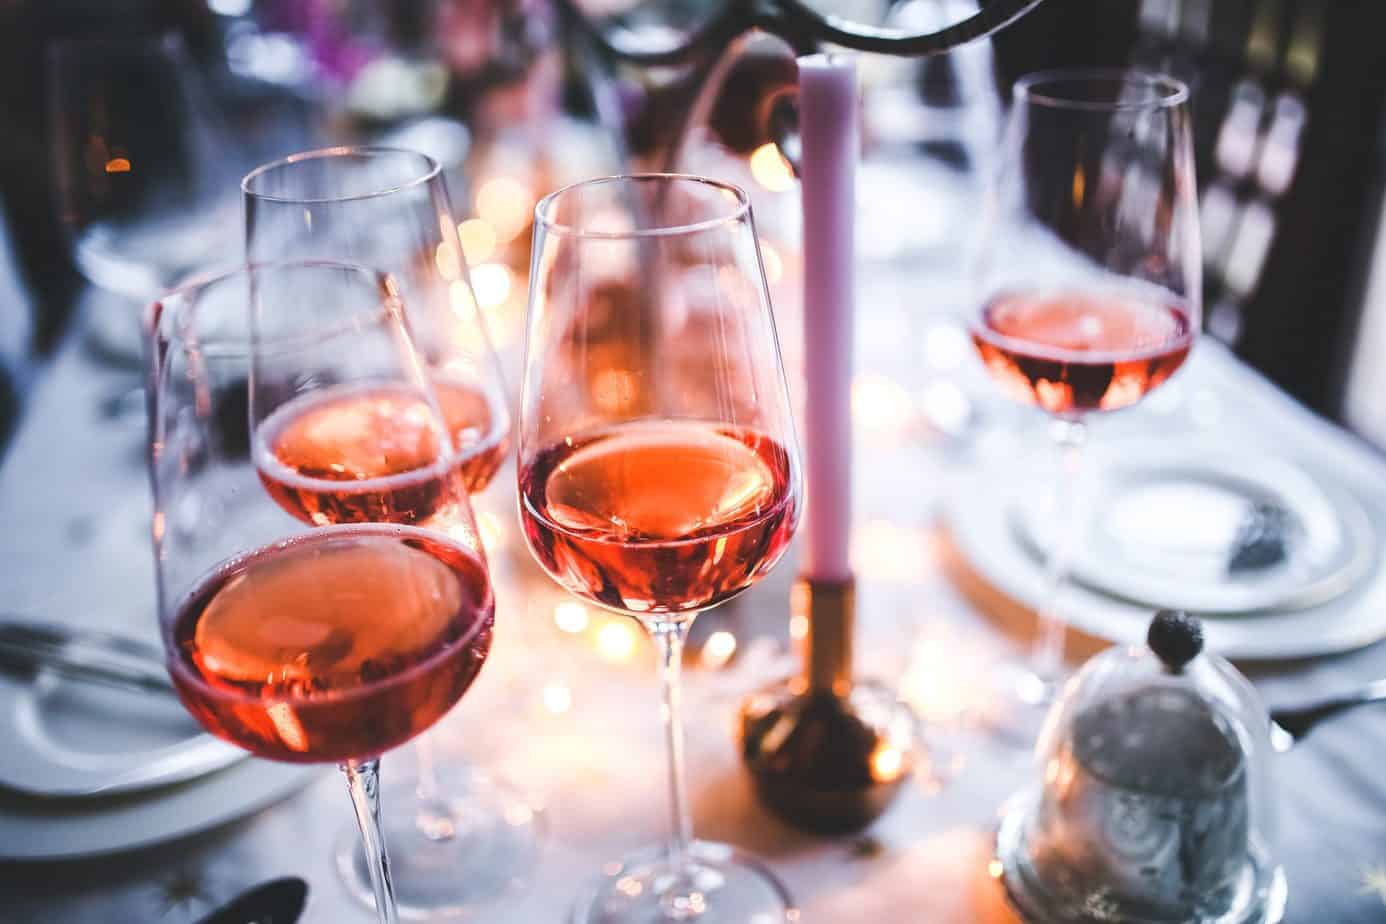 Four glasses of rosé wine on table.